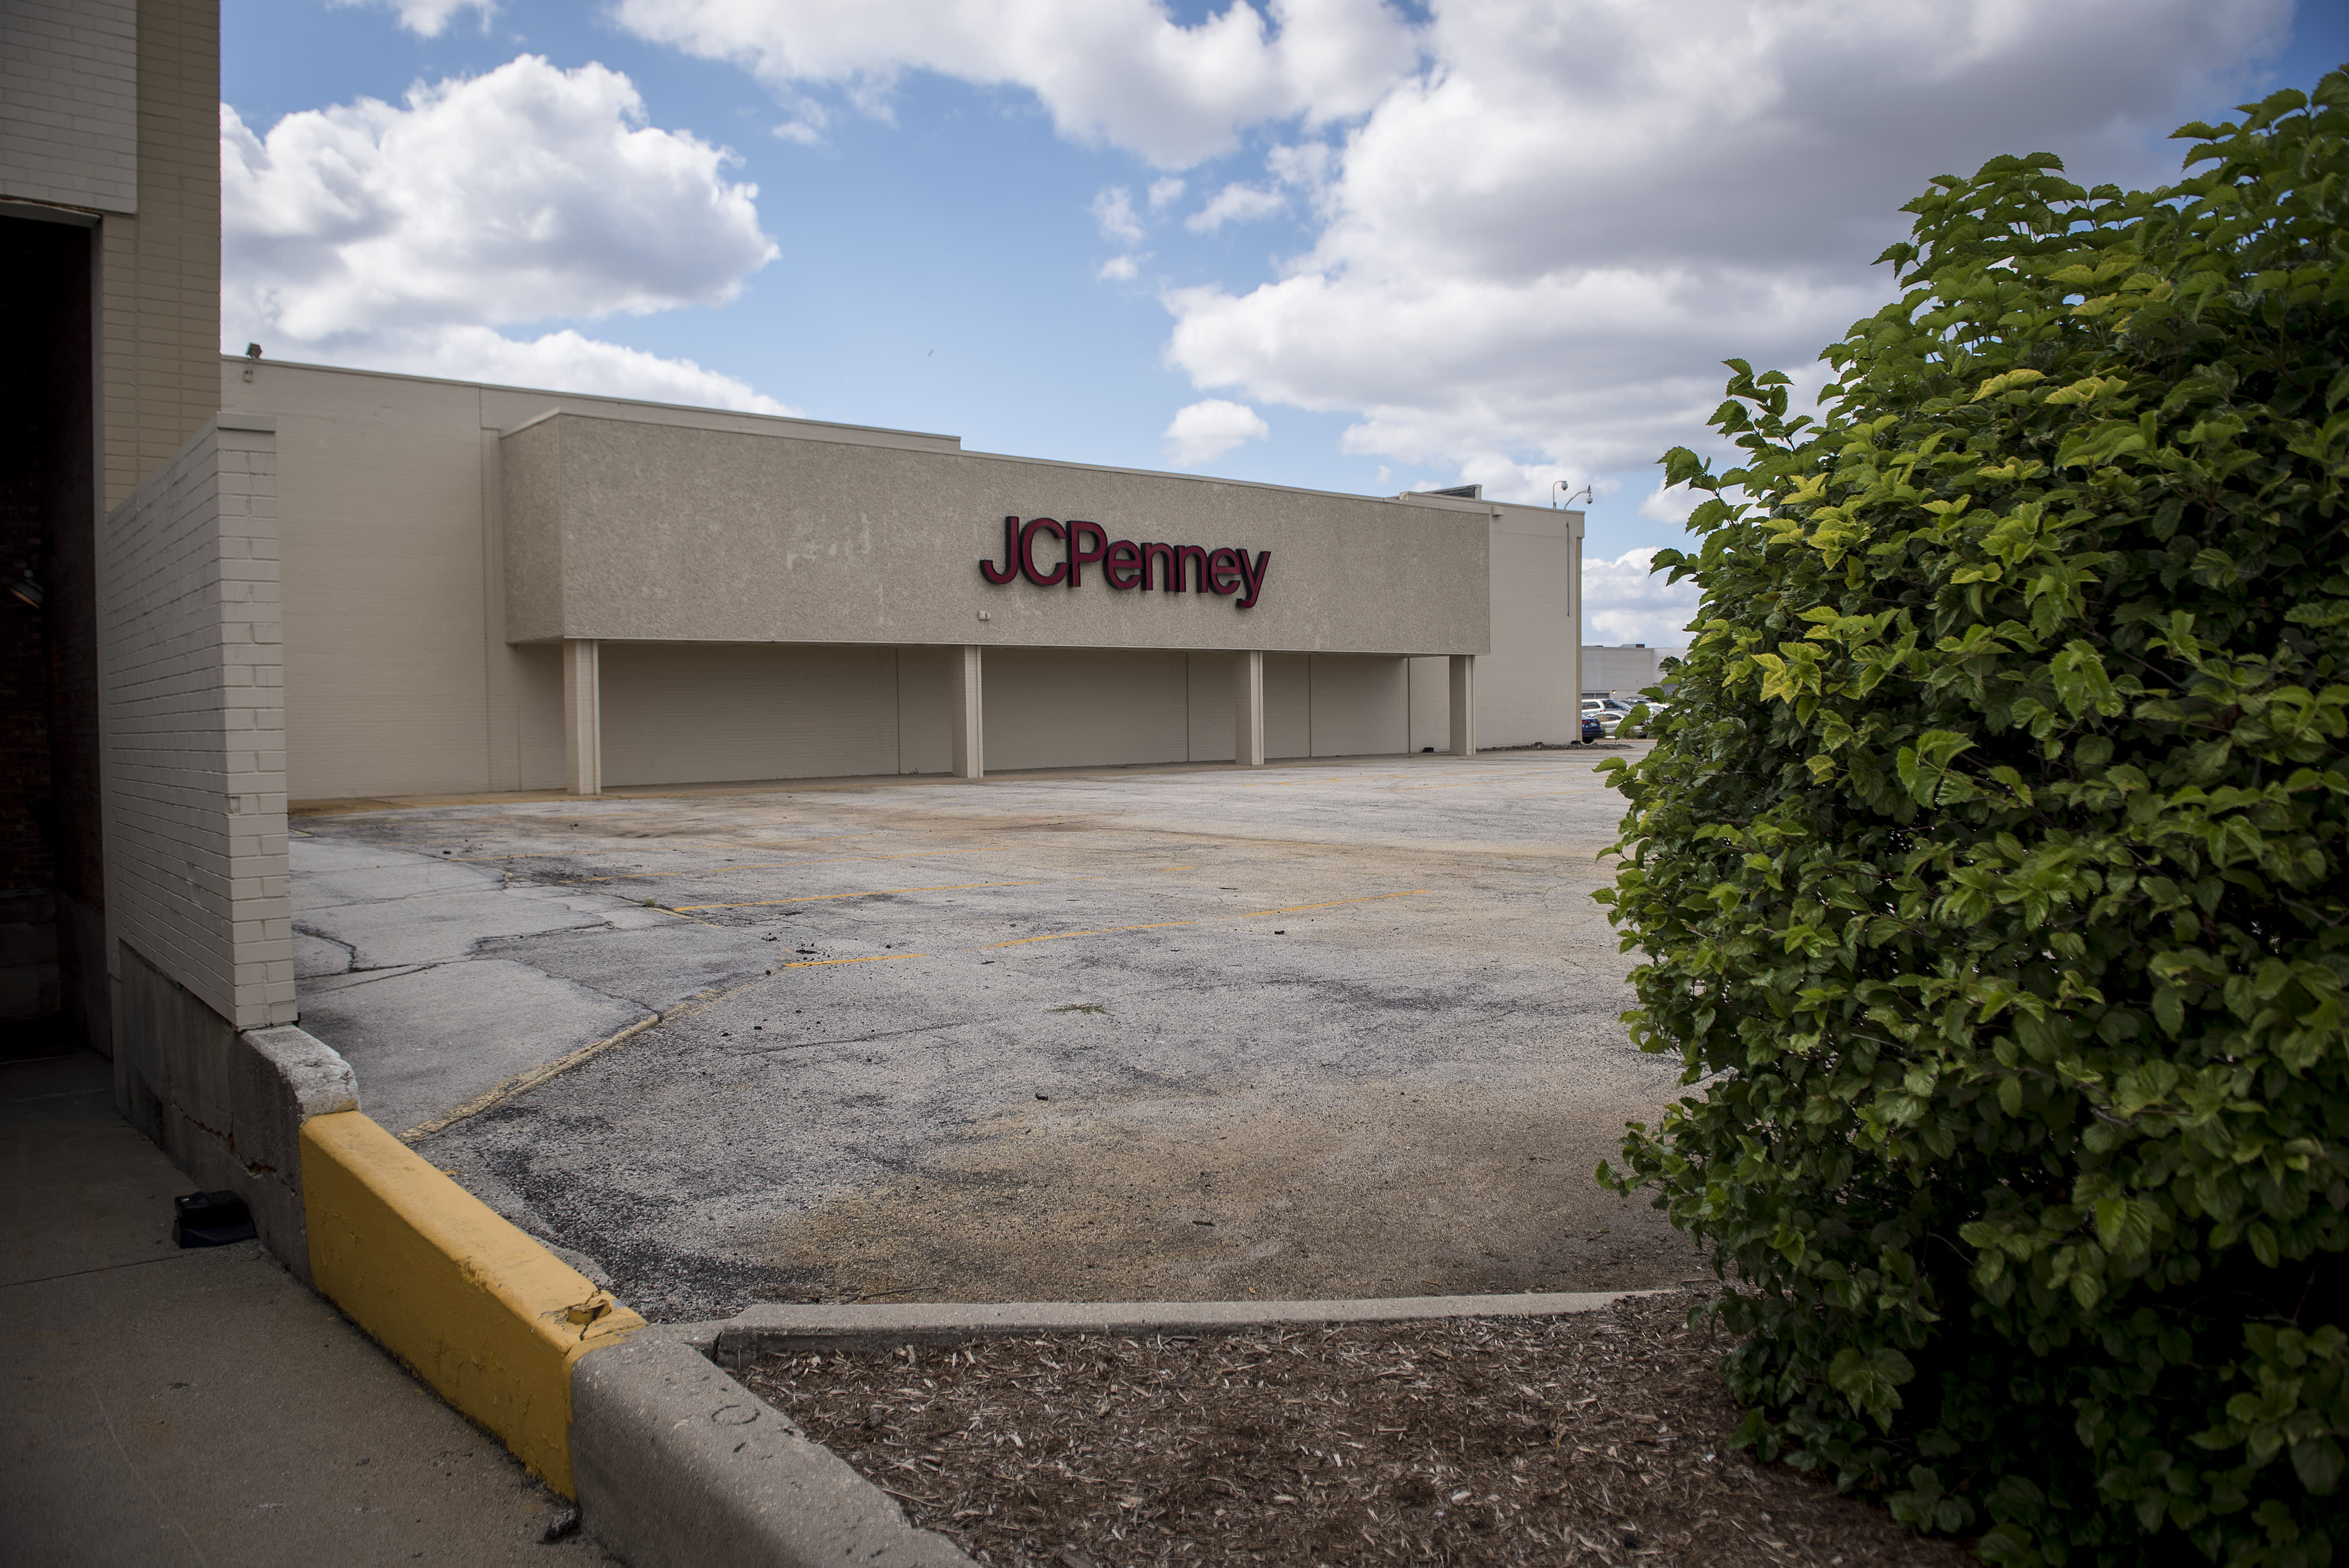 You Can Expect More Jc Penney Store Closures In 2020 And Beyond